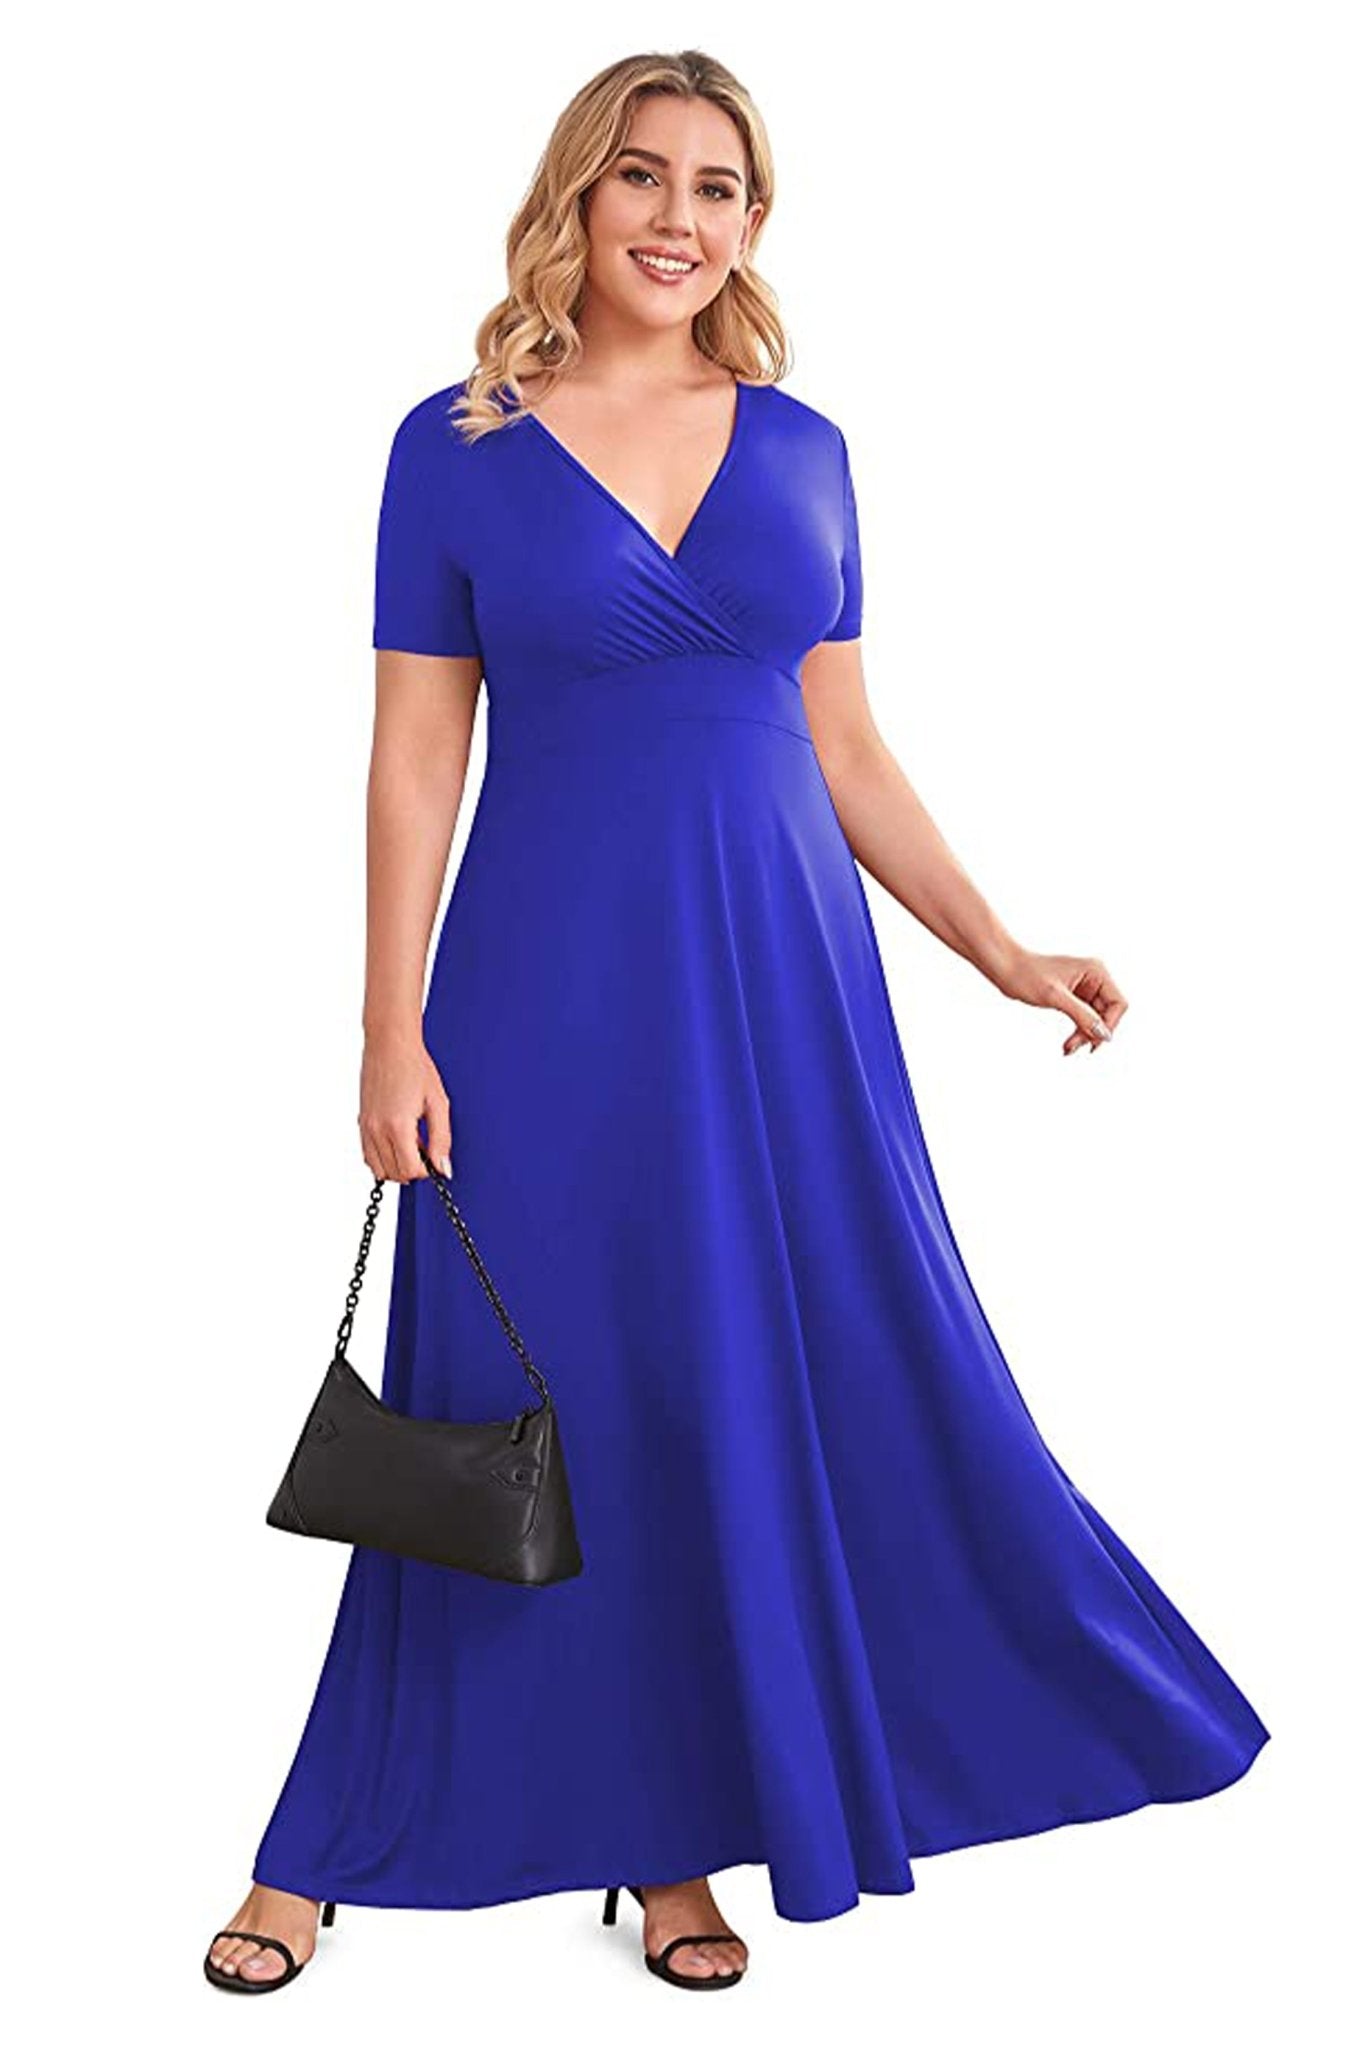 Women's Solid Formal Maxi Dress, Plus Size Gown - POSESHE